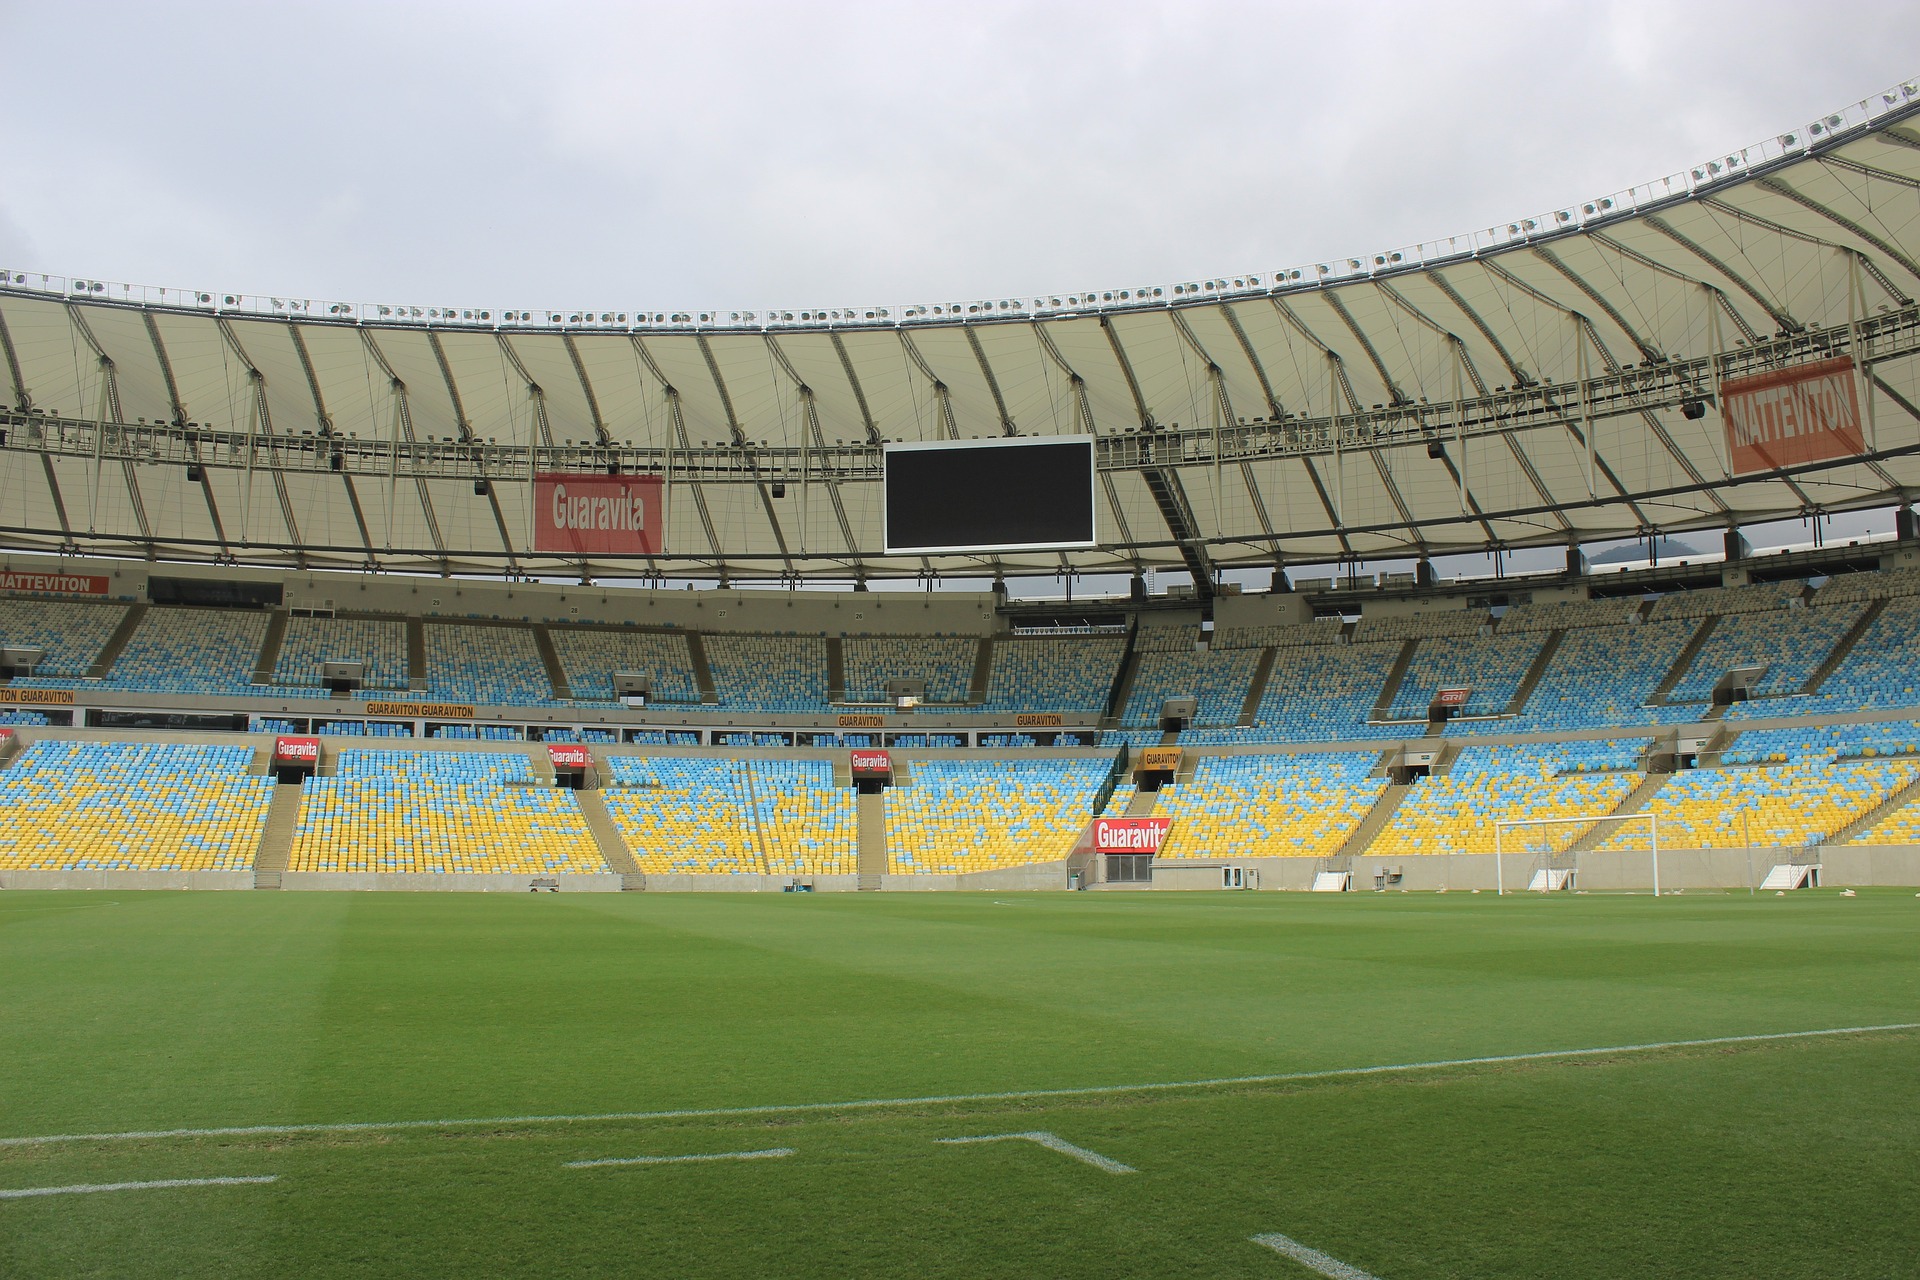 With a private tour, you can explore the legendary Maracanã at your own pace, delving into its storied past and getting an up-close look at this sporting marvel.